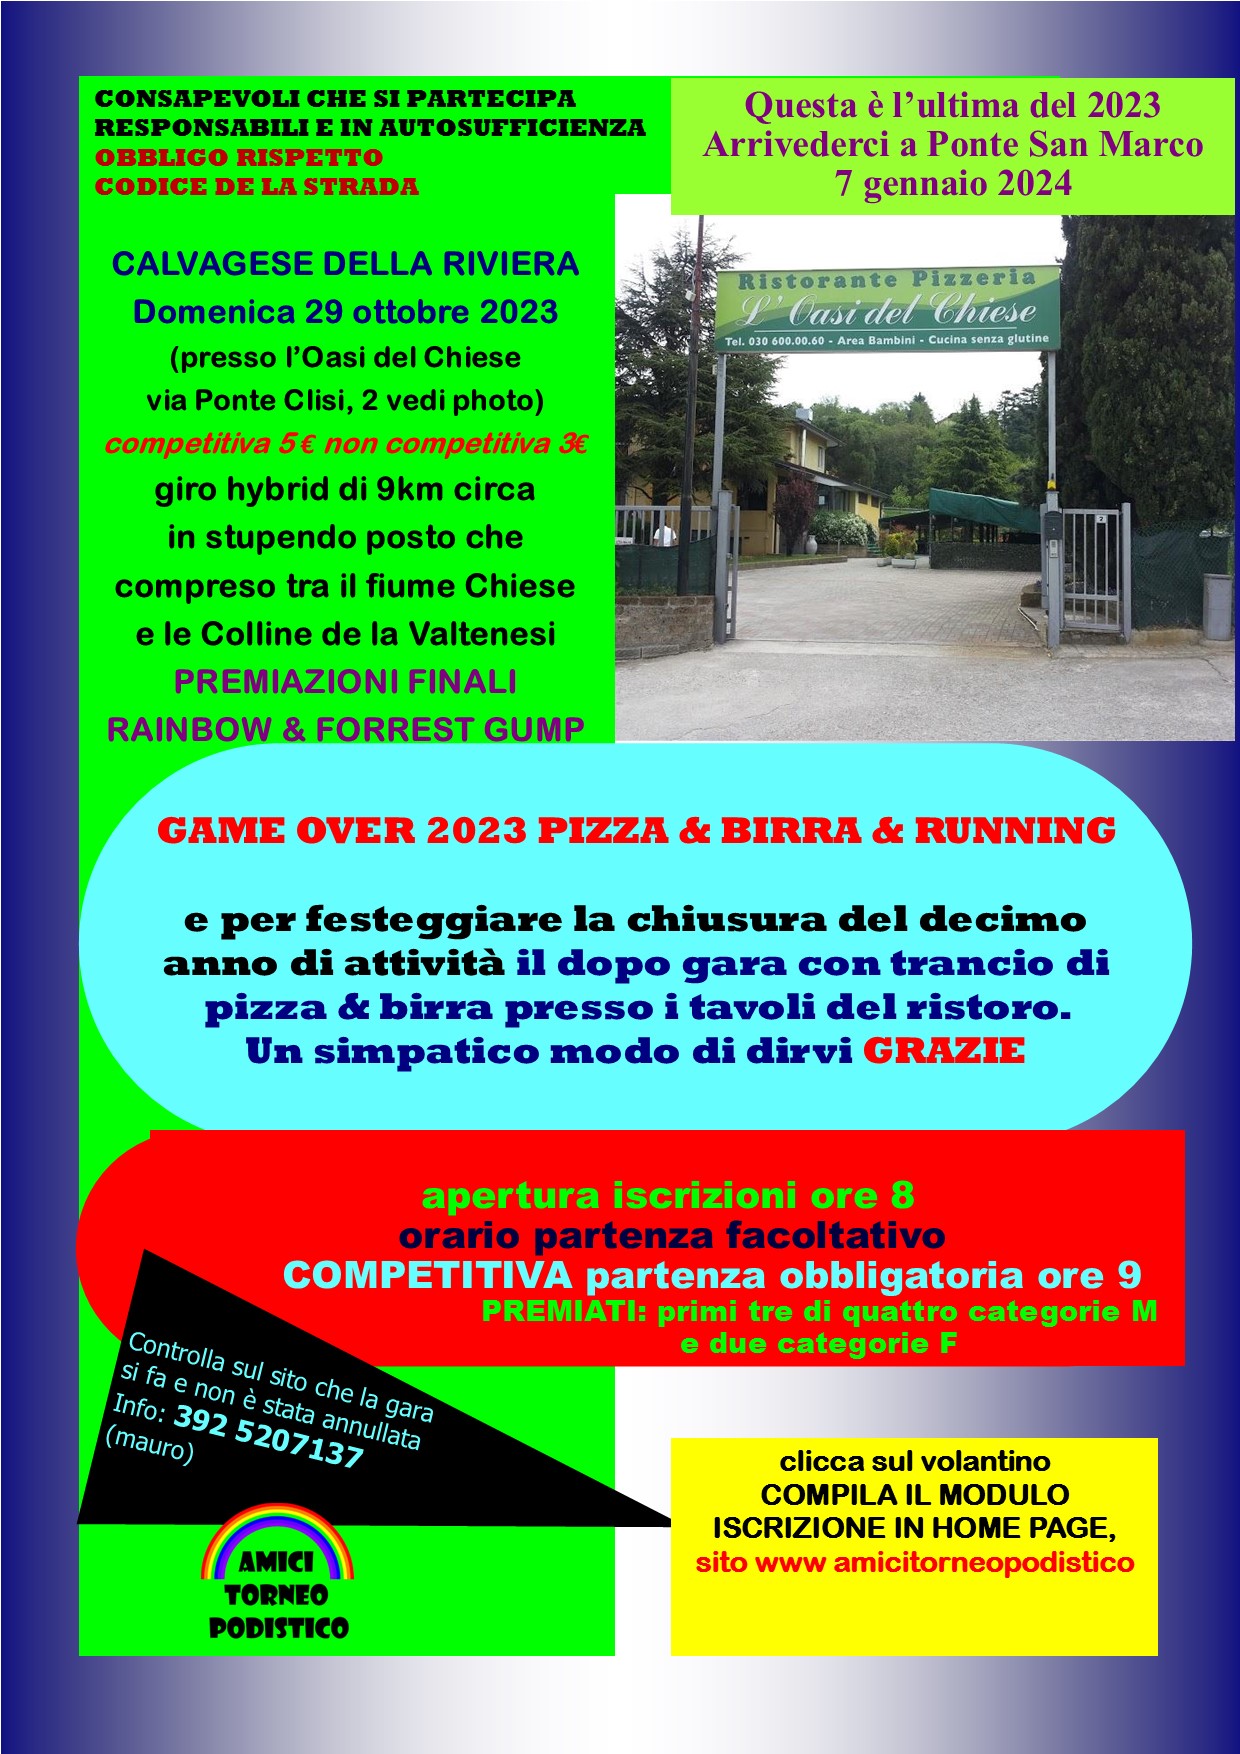 GAME OVER 2023 PIZZA & BIRRA & RUNNING